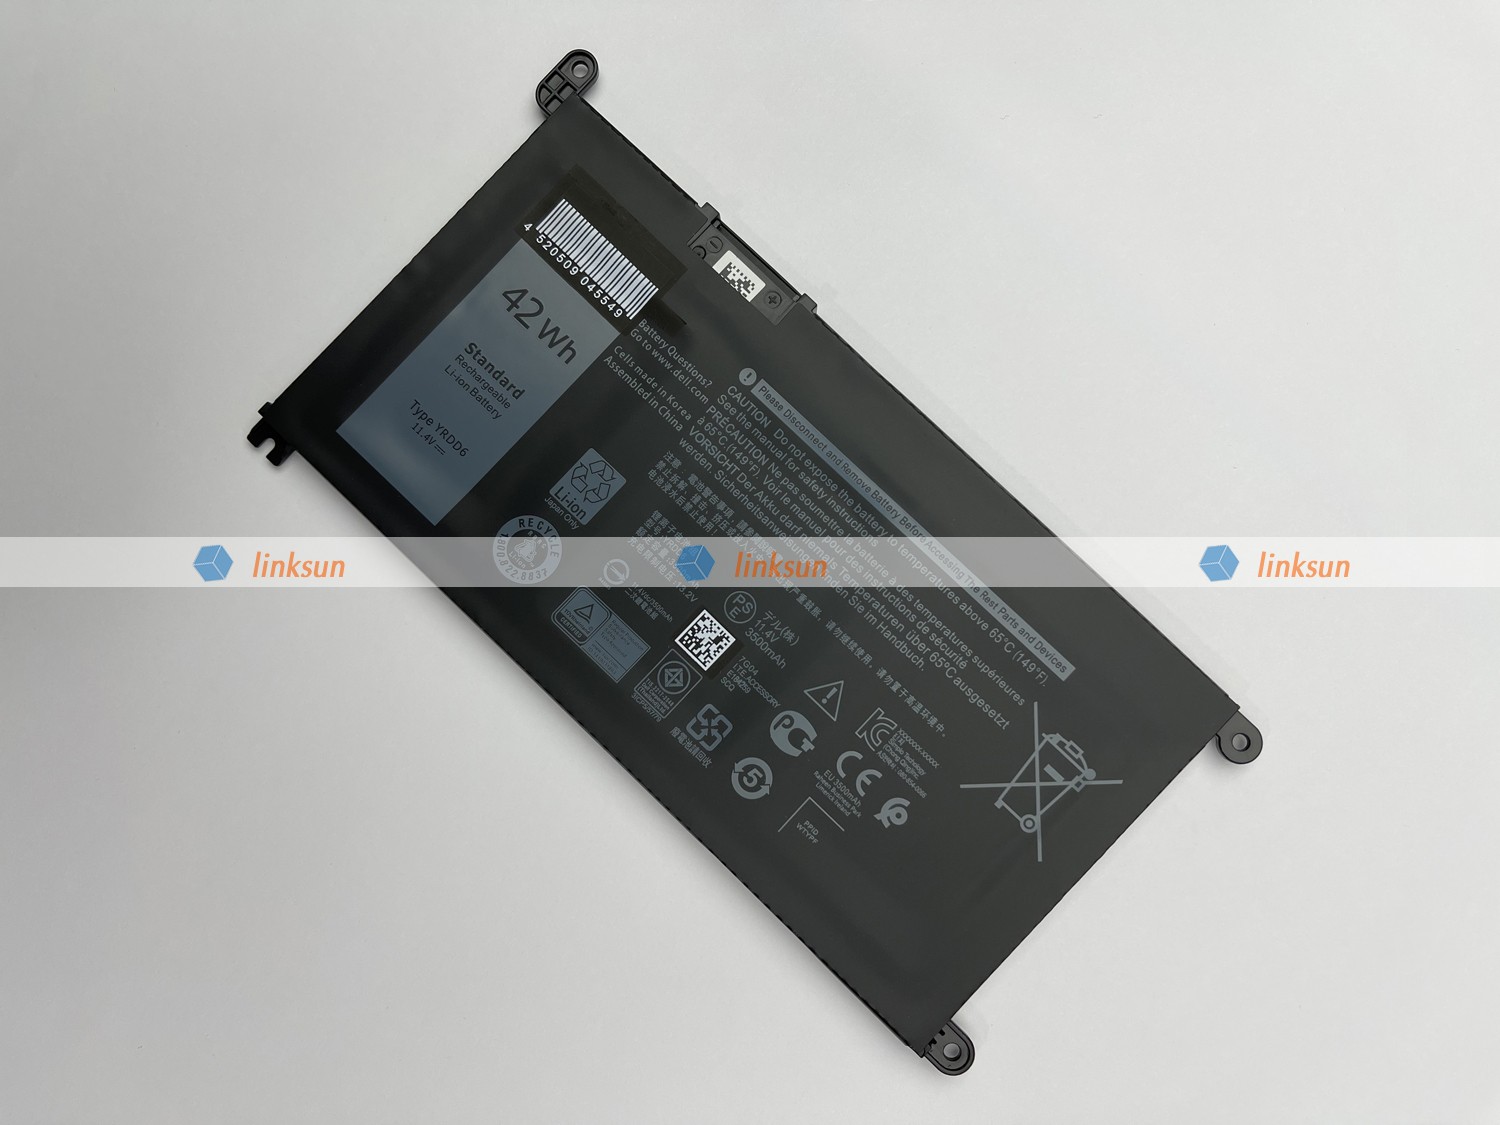 YRDD6 laptop battery inclined